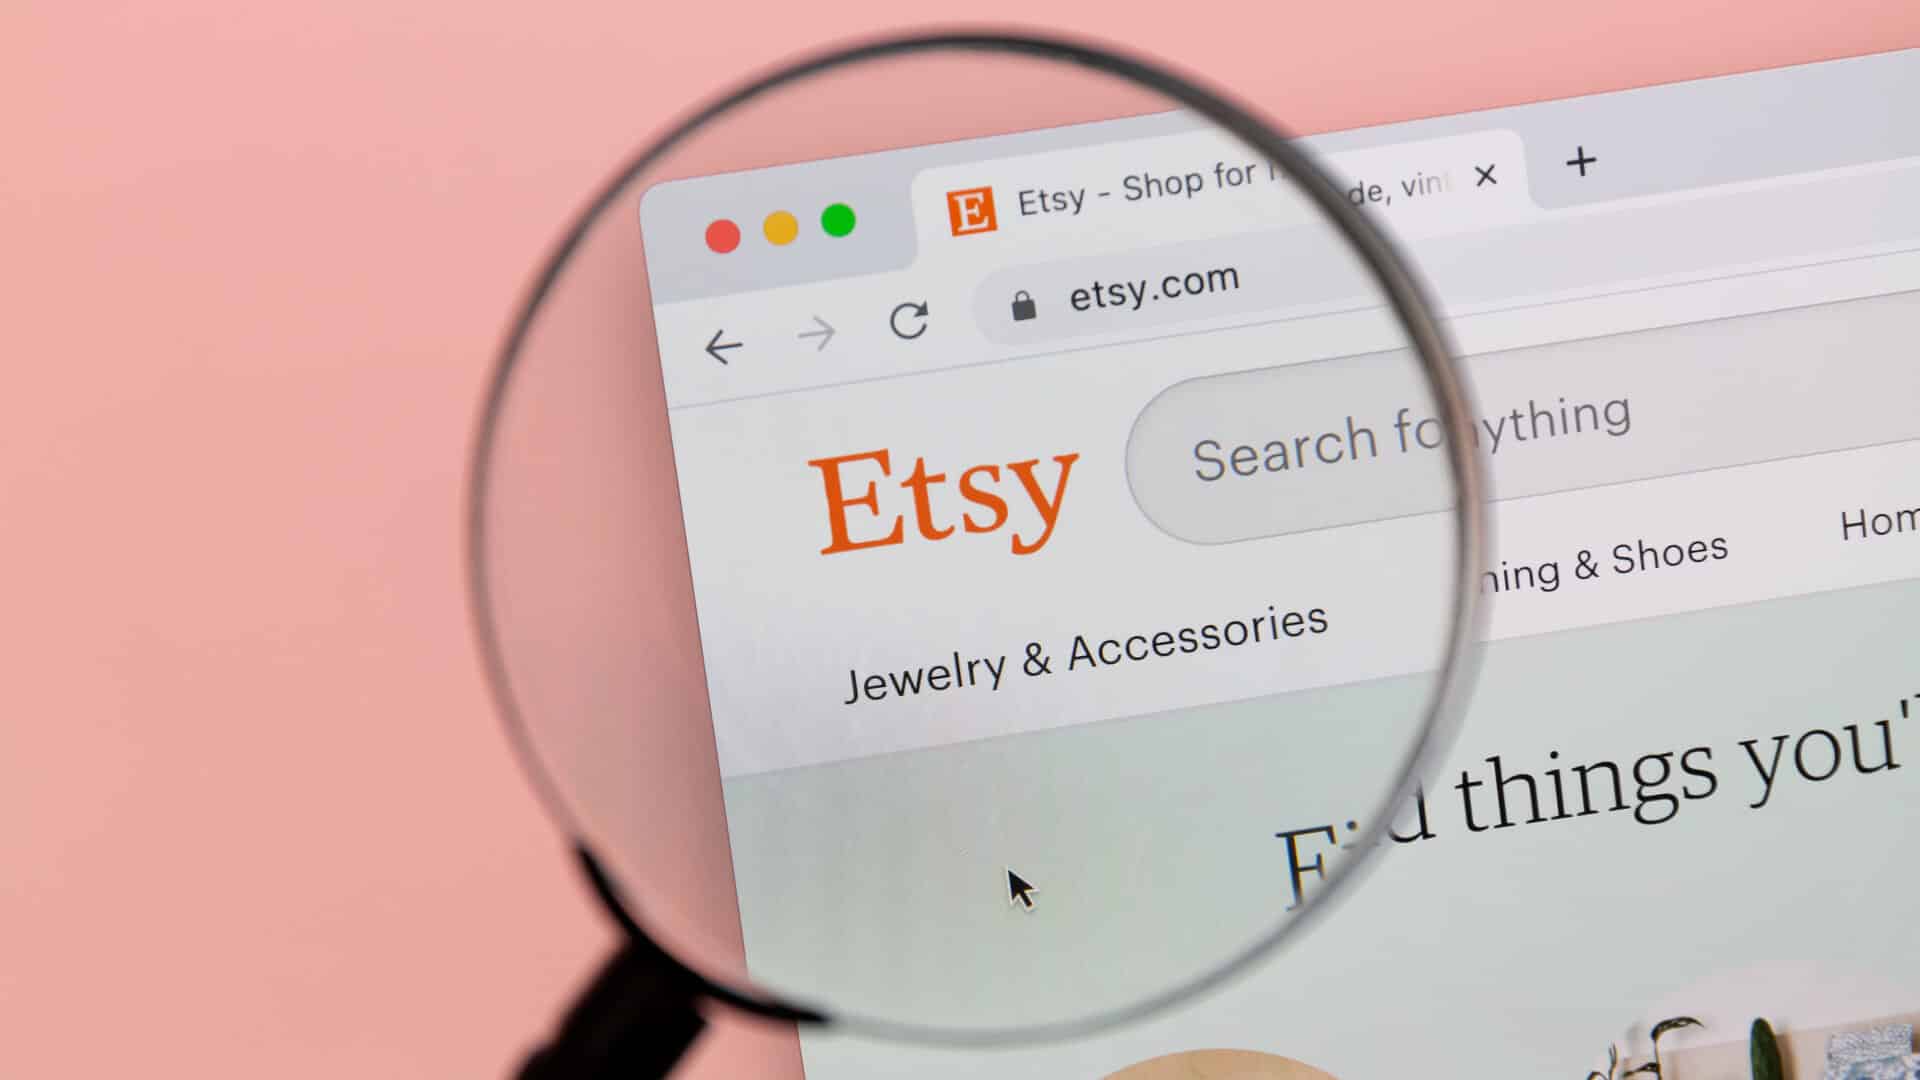 etsy-sellers-to-pay-30-higher-transaction-fees-beginning-in-april